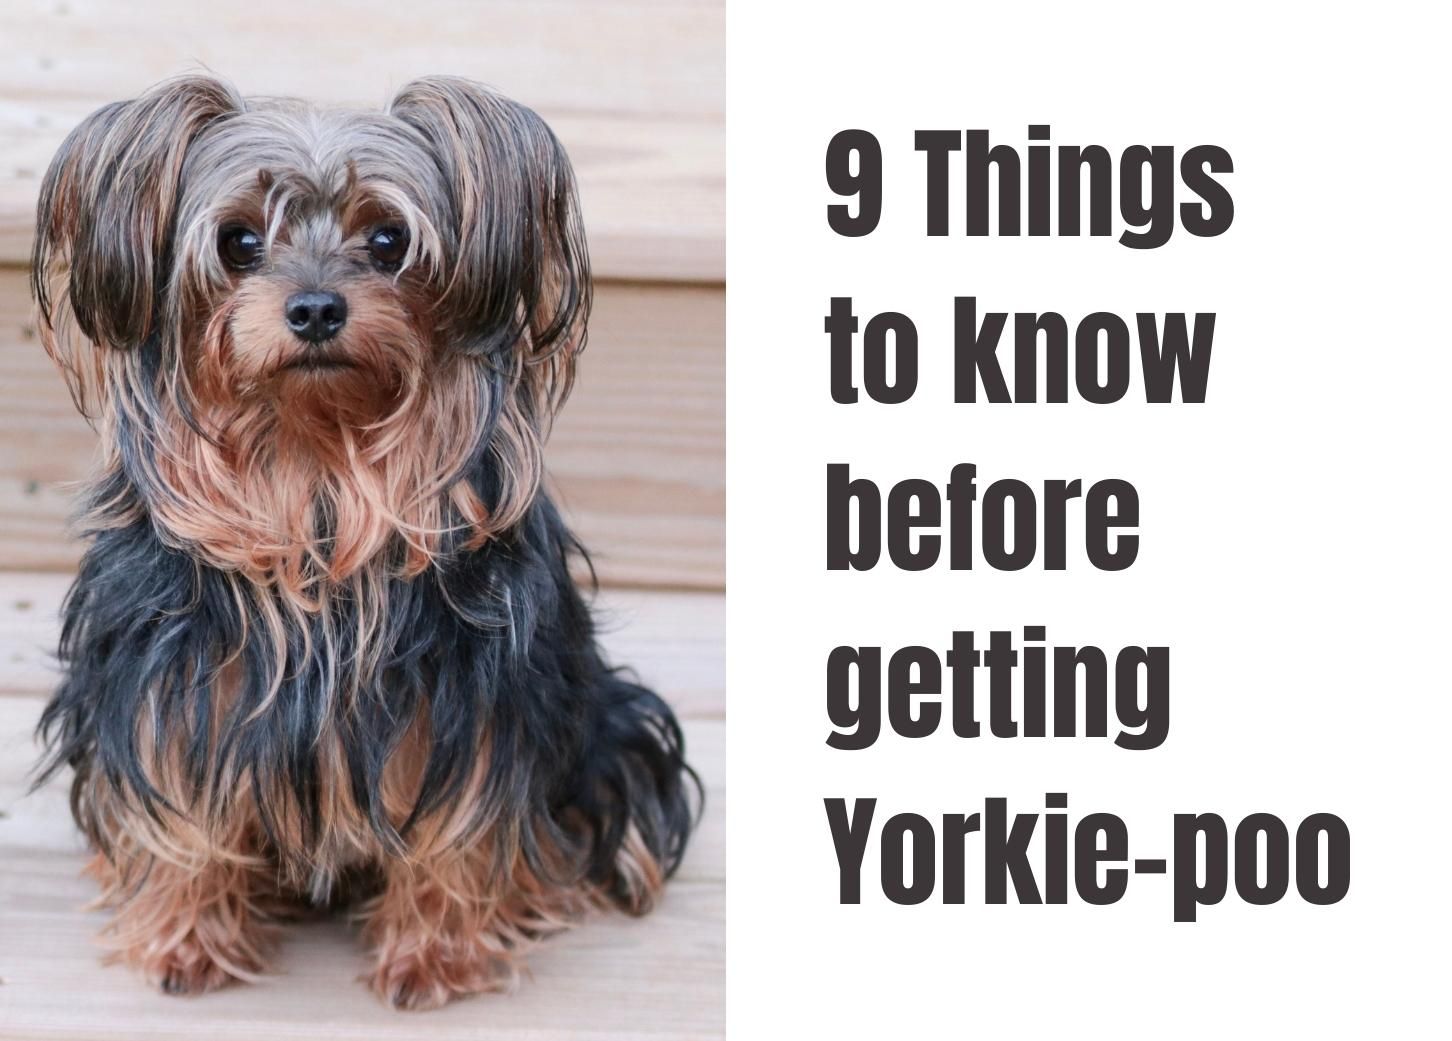 9 Essential Facts About the Yorkie Poo You Should Know